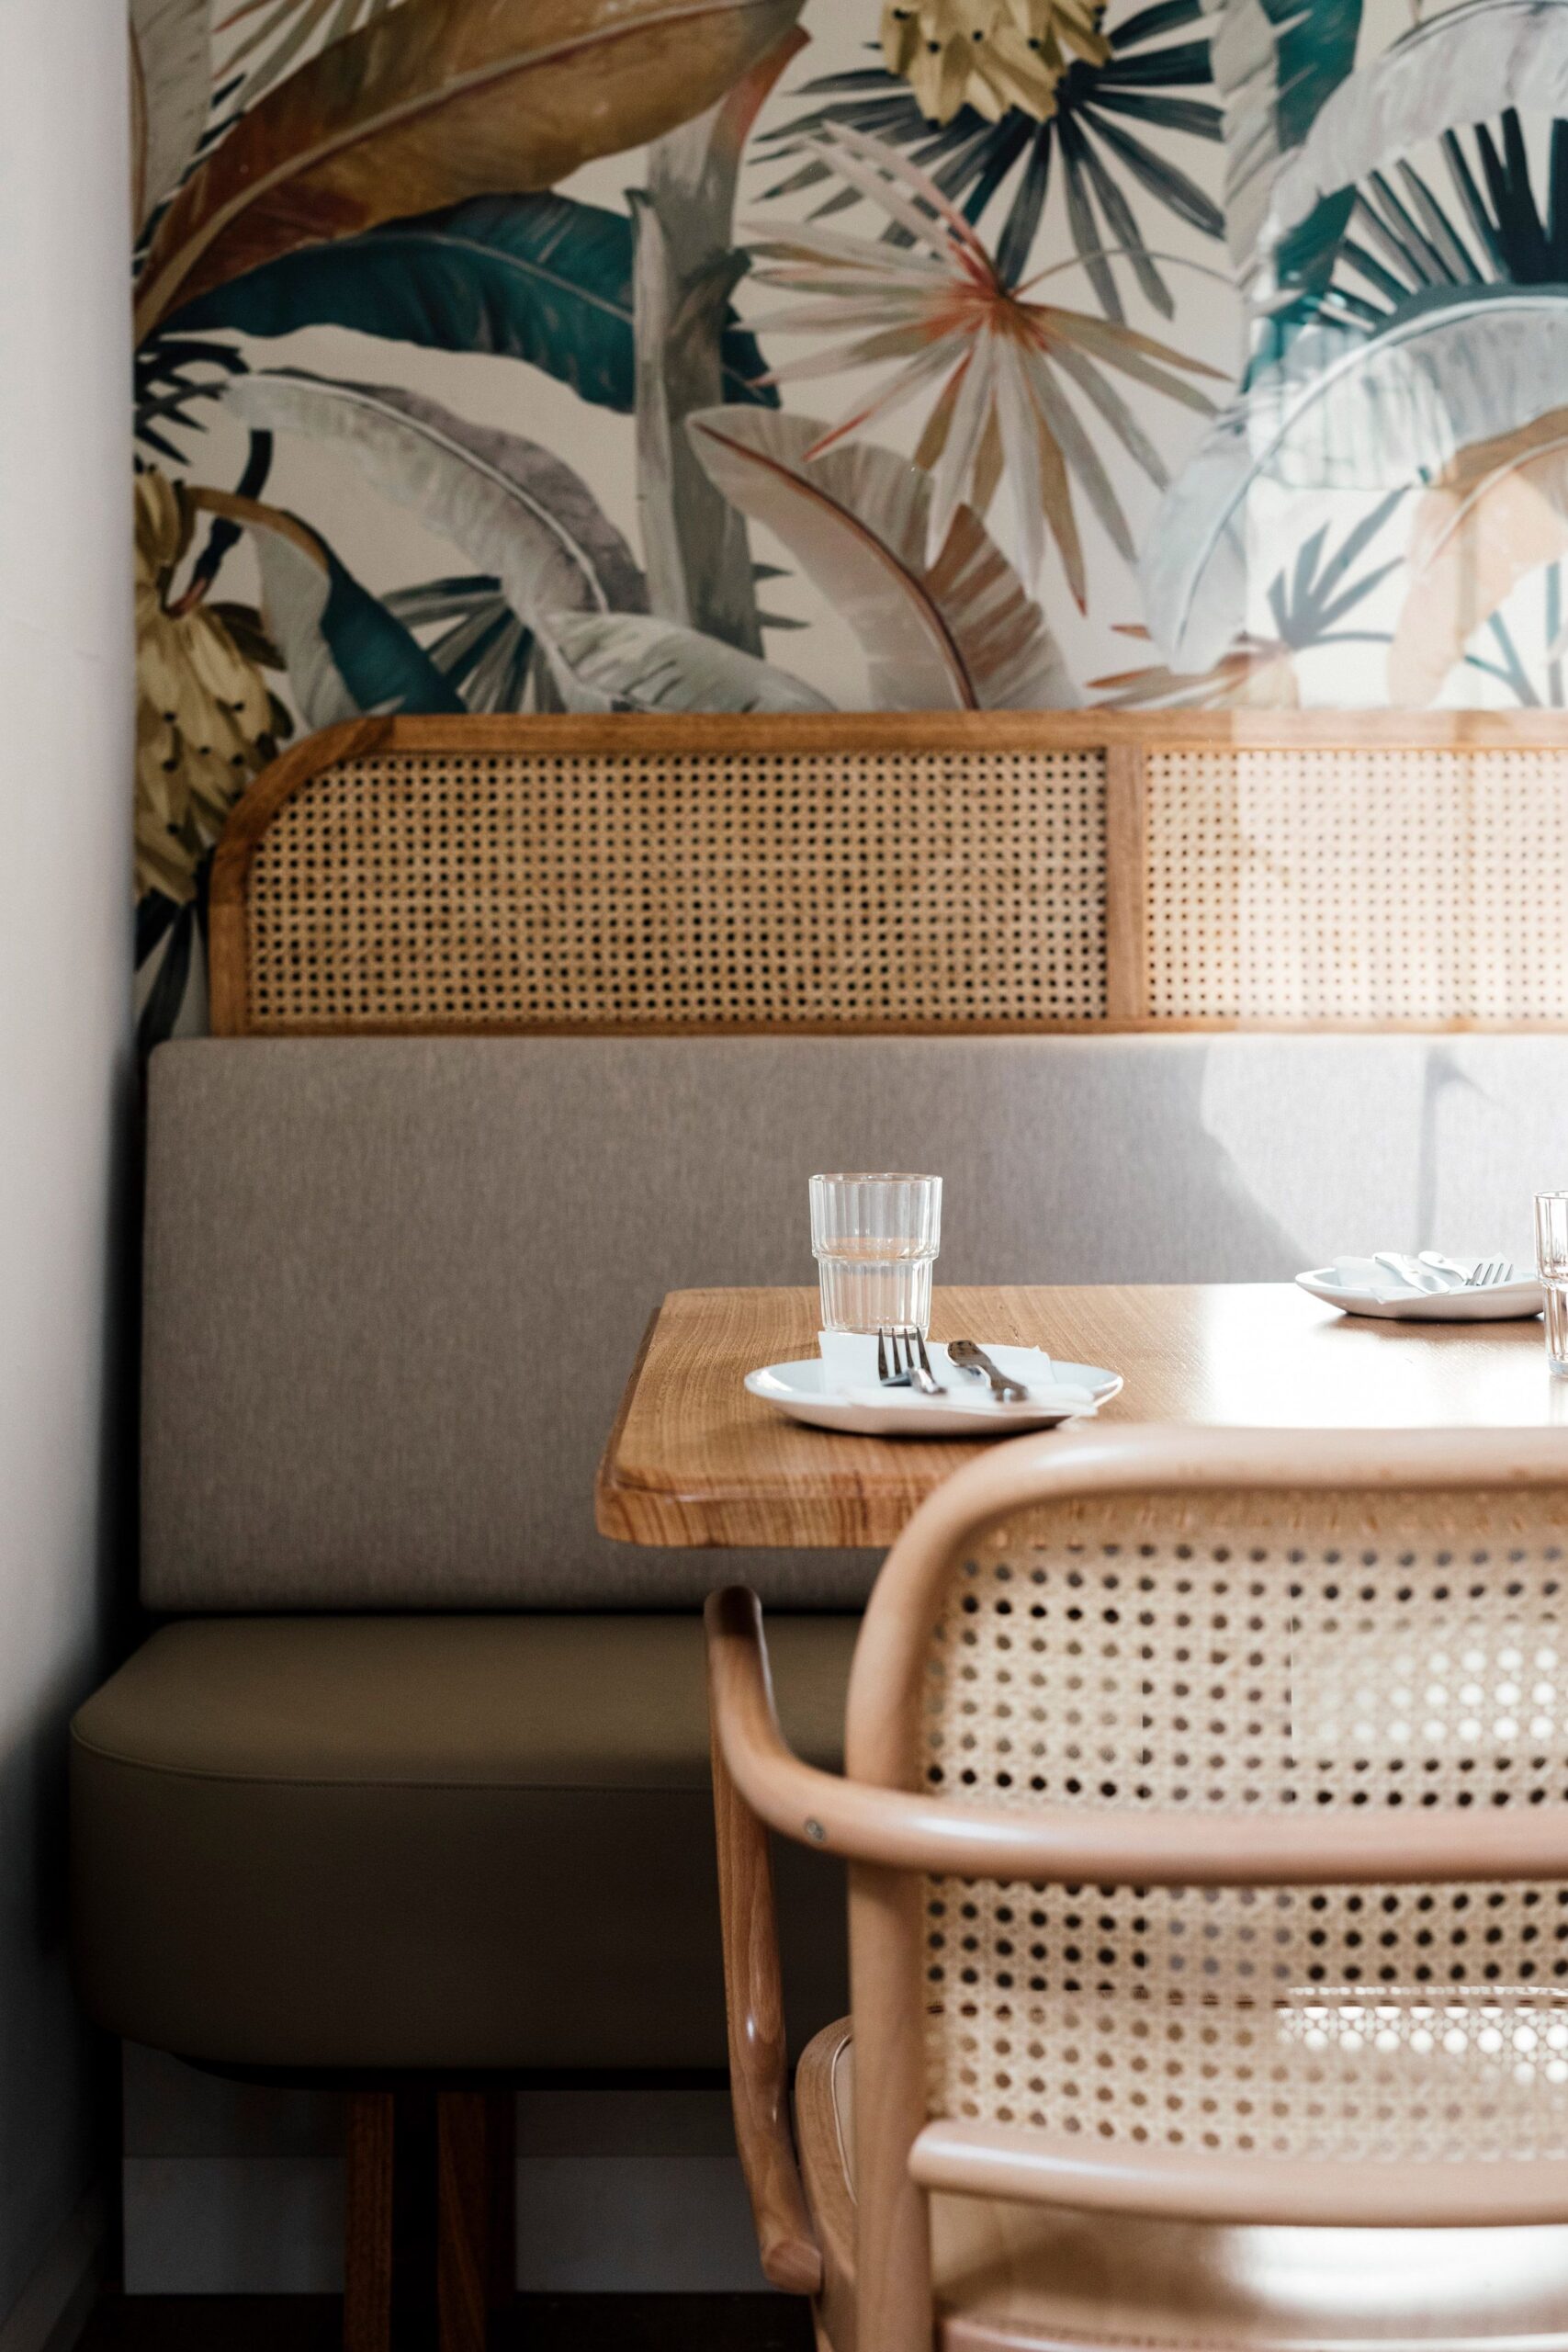 Tips to save money when purchasing
restaurant furniture